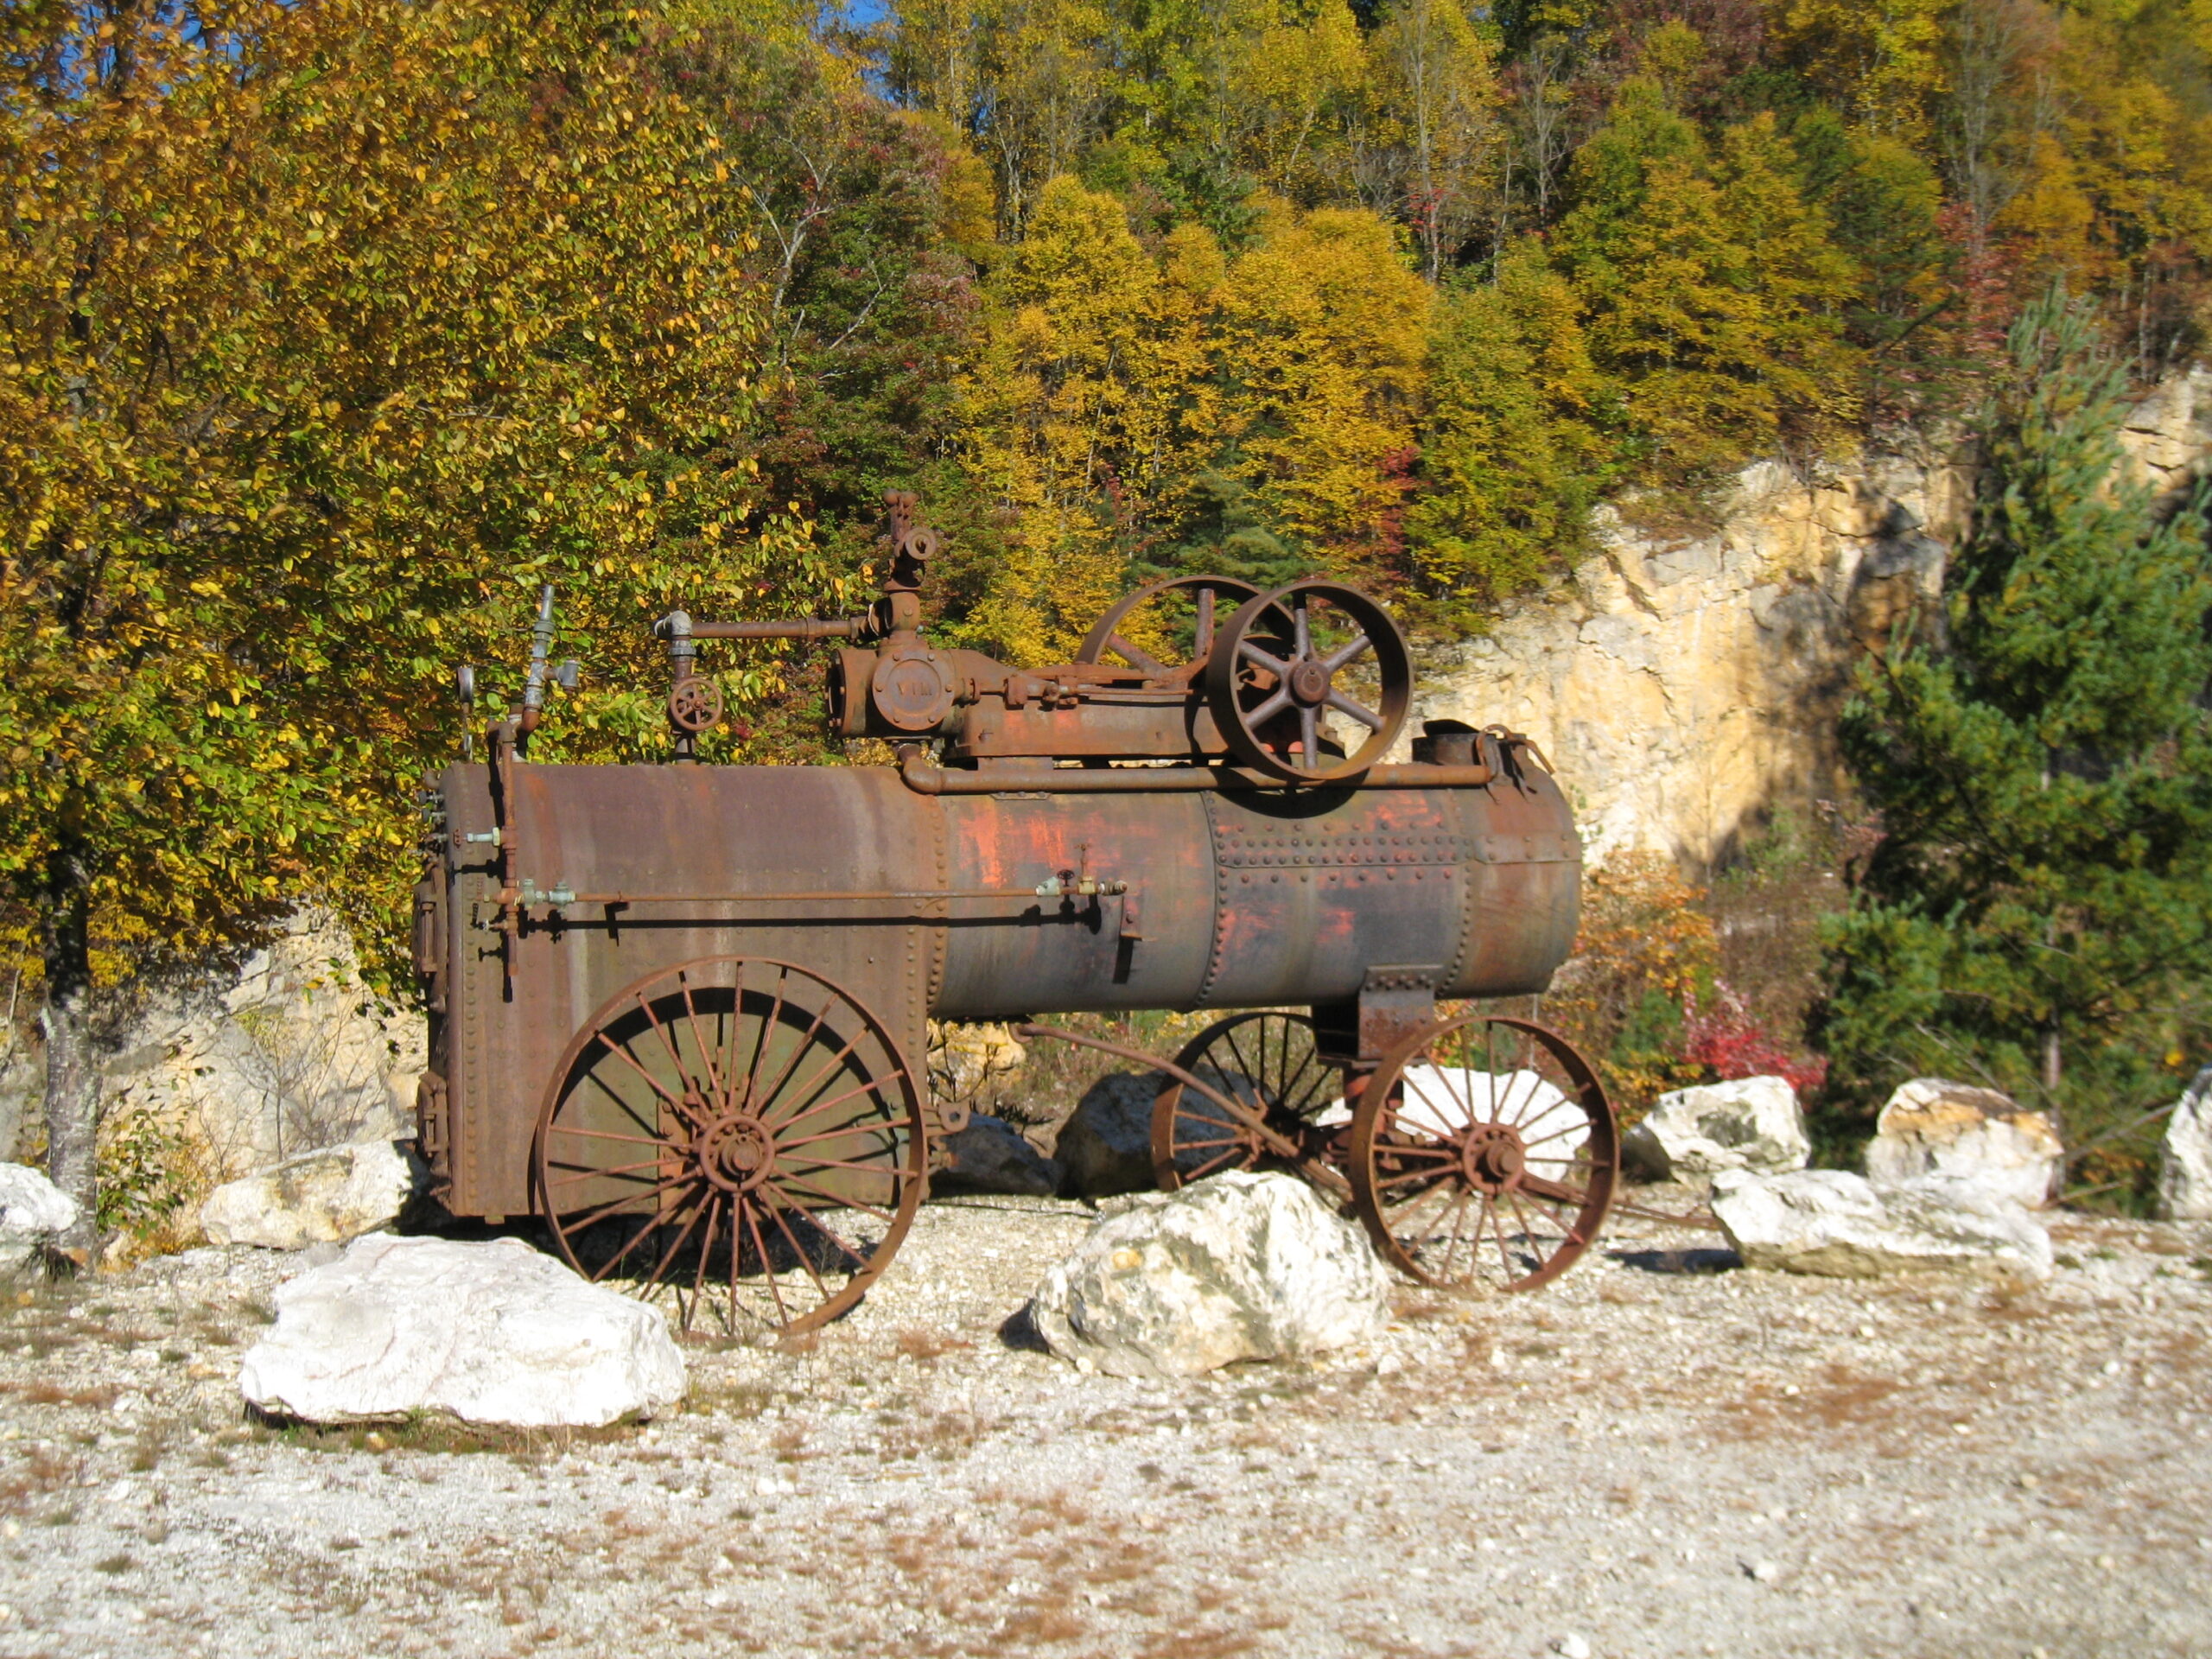 An antique steam engine at the North Carolina Mining Museum